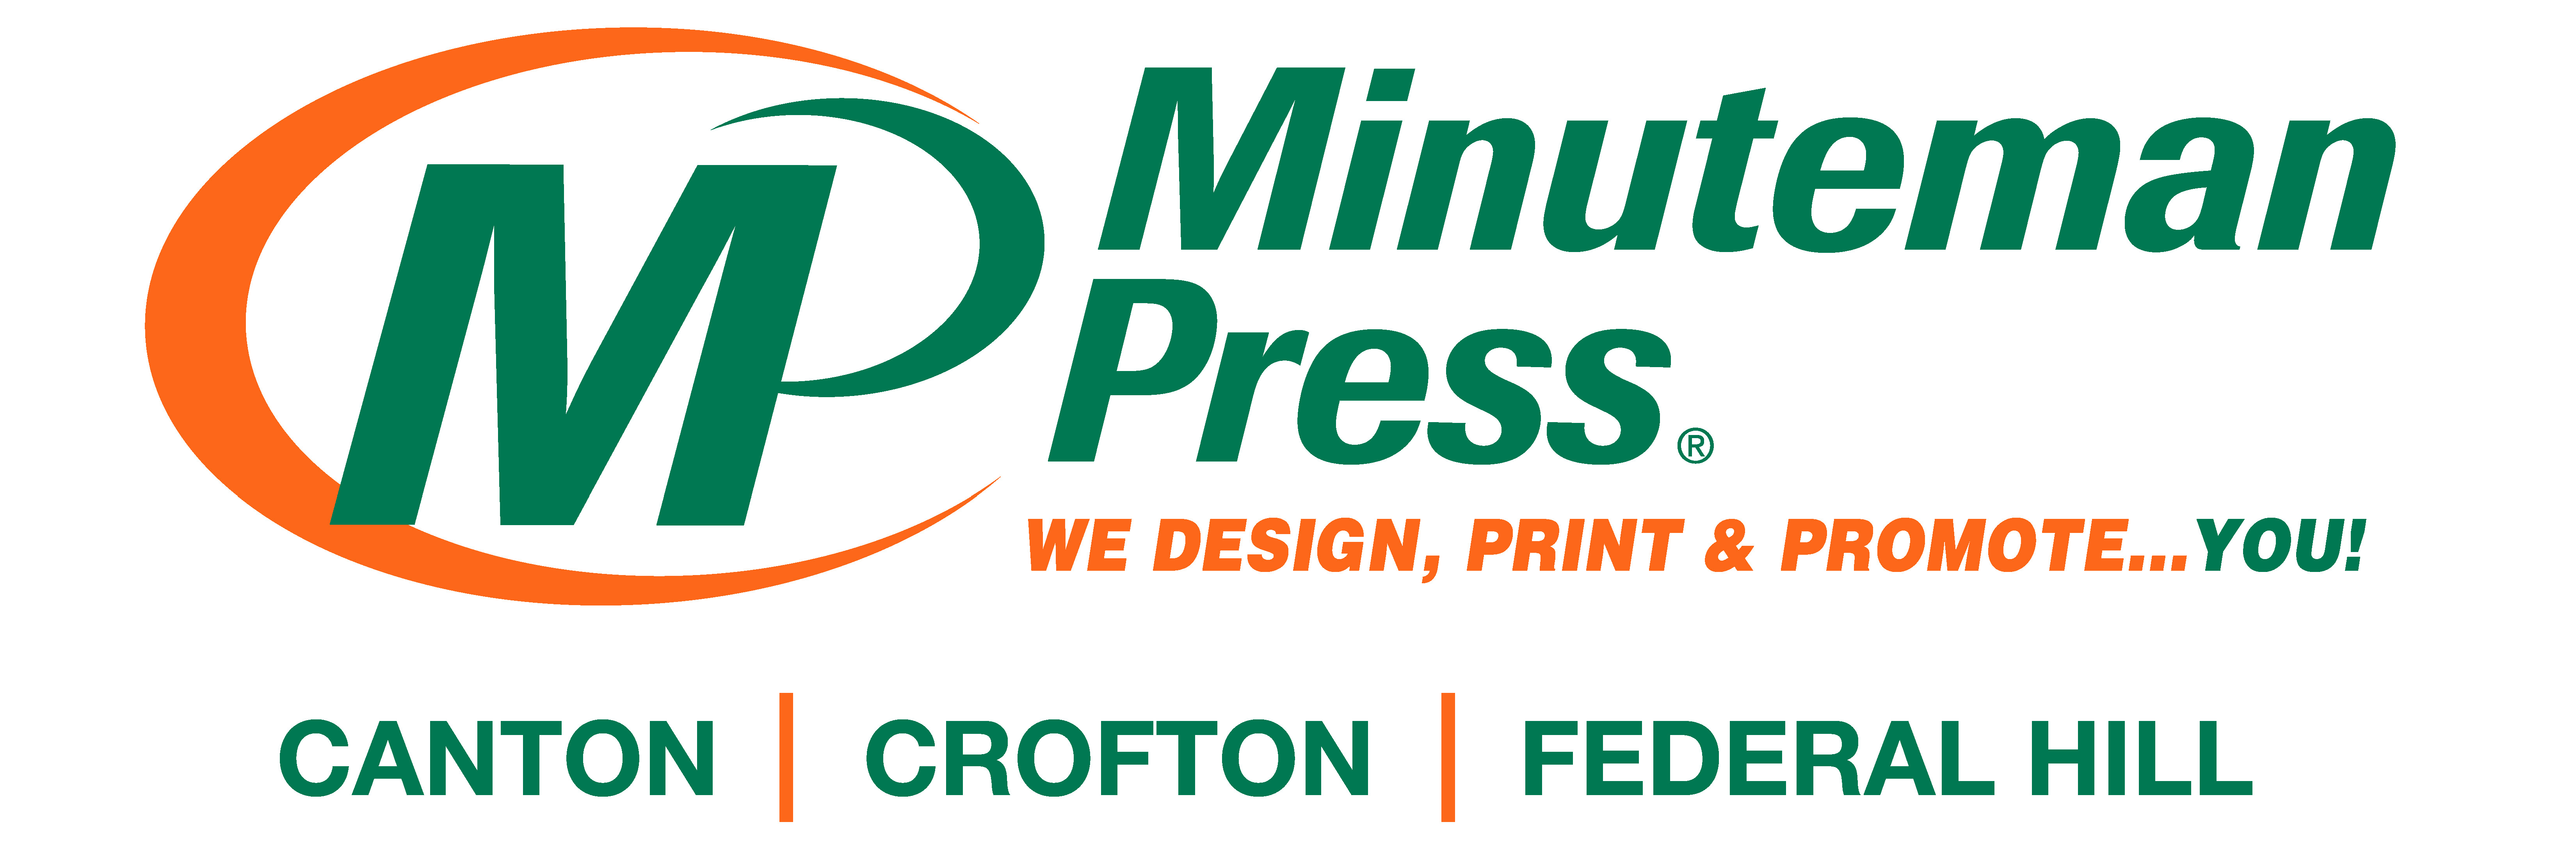 Minuteman Press of Crofton, Canton, and Federal Hill